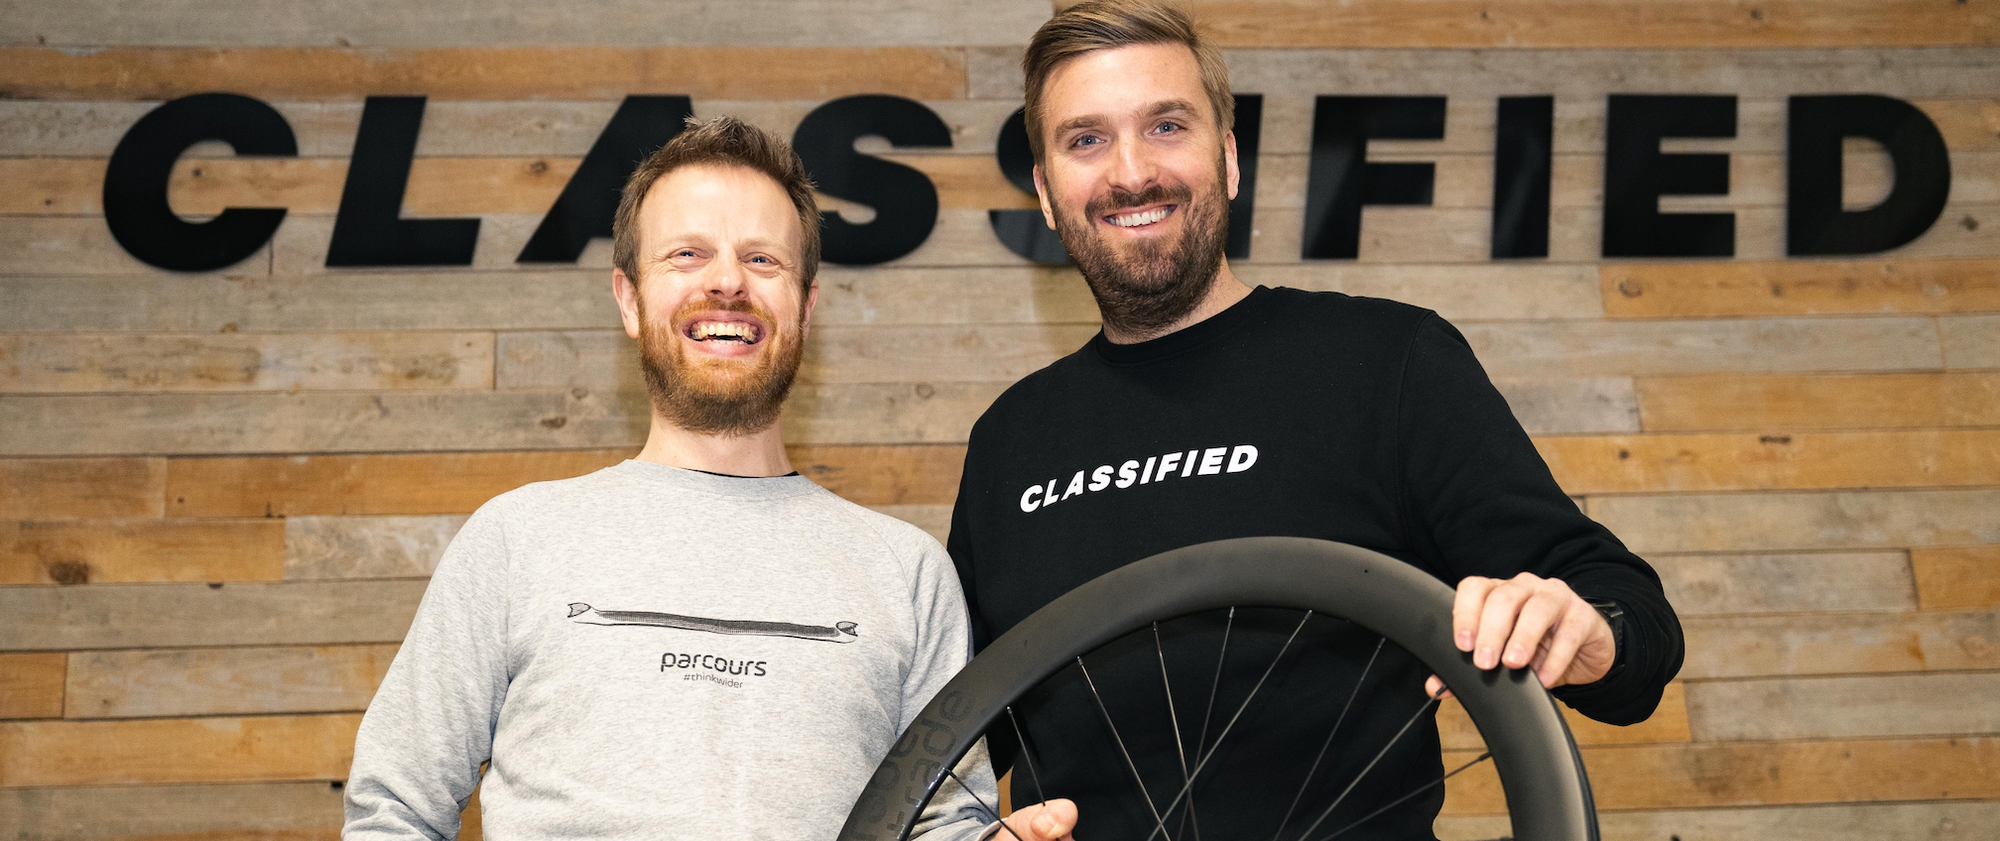 Parcours And Classified Announce Partnership, Bringing Class Leading Aerodynamics Together With Powershift Technology